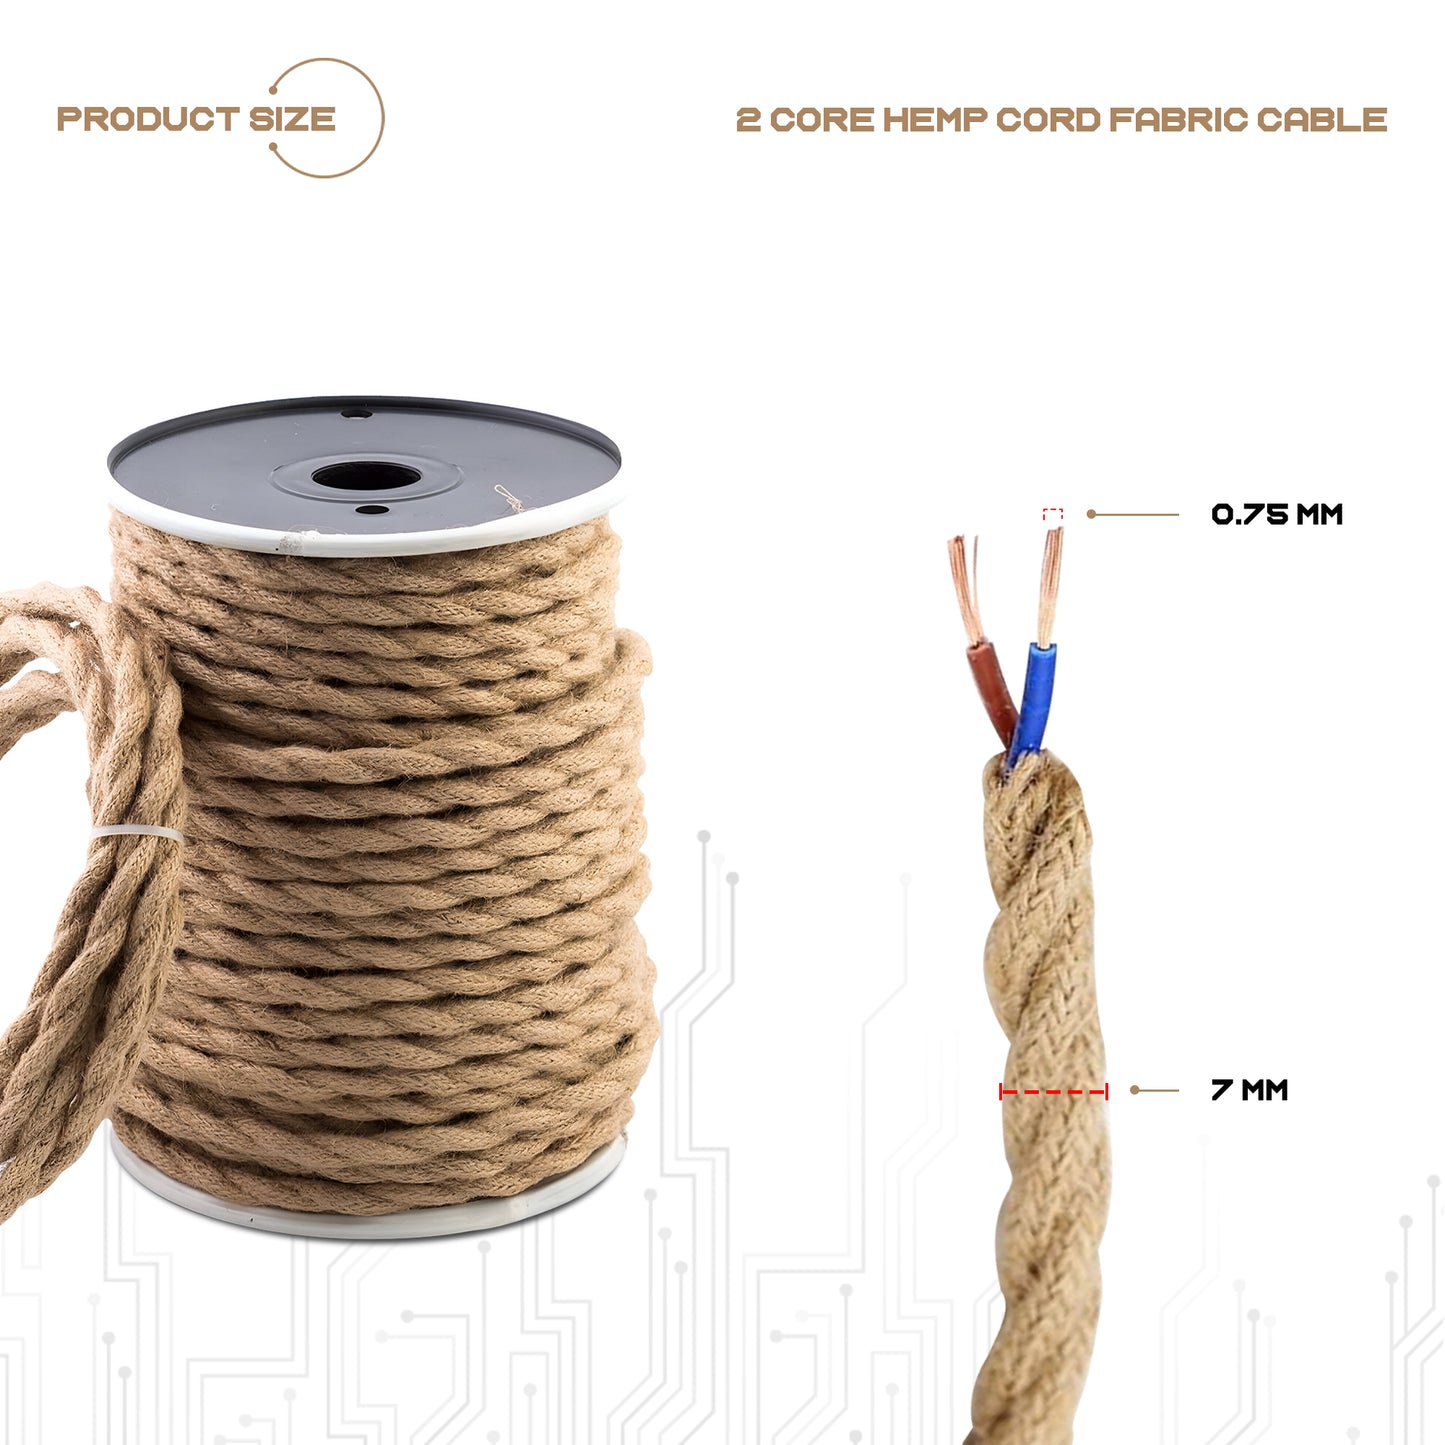 2 core hemp rope fabric cable - size image